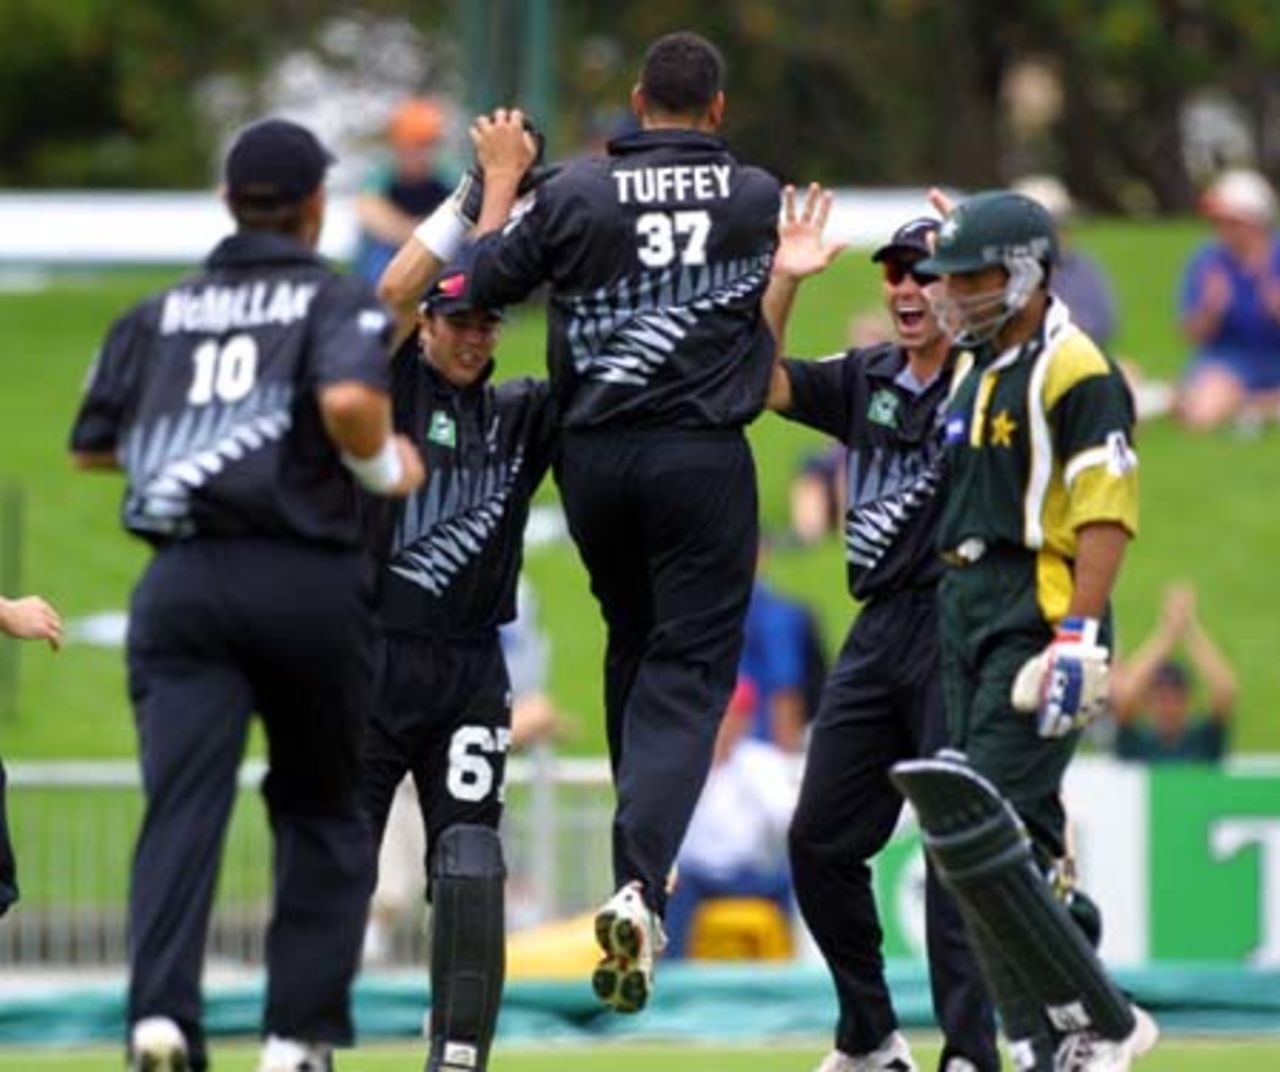 New Zealand fast medium bowler Daryl Tuffey runs down the wicket towards his team-mates, wicket-keeper Adam Parore and slip fielder Stephen Fleming, in celebration of bowling Pakistan opening batsman Saeed Anwar with the first ball of the match. Craig McMillan (left) runs to join them. 2nd One-Day International: New Zealand v Pakistan at McLean Park, Napier, 20 February 2001.